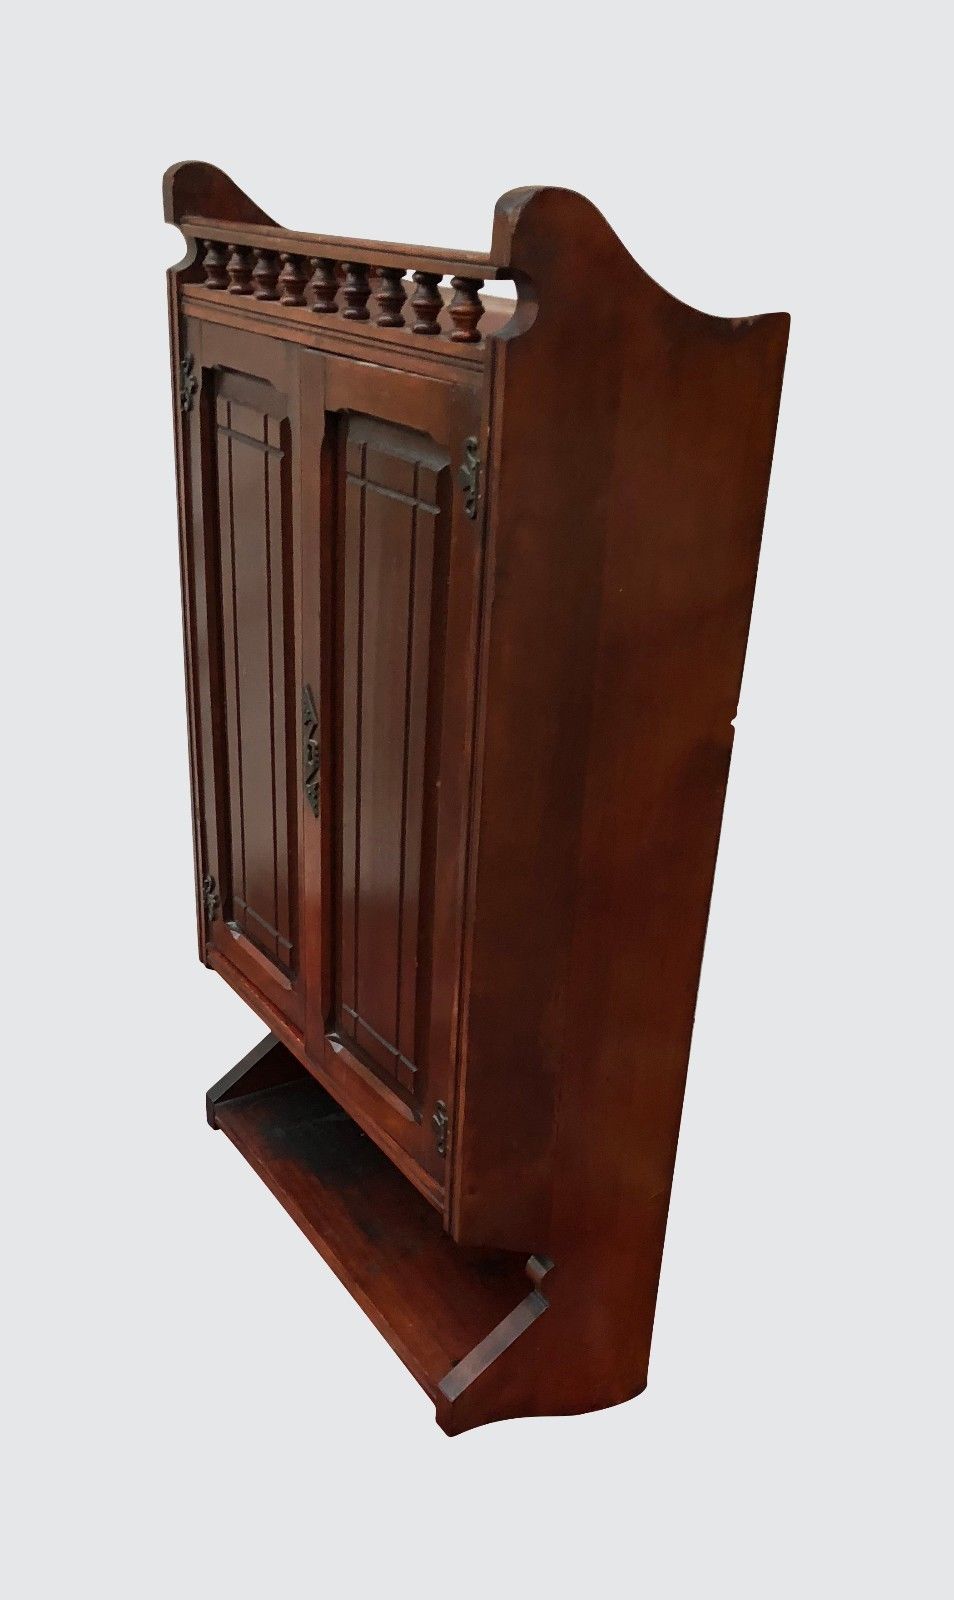 EASTLAKE VICTORIAN CHERRY STICK & BALL GALLERY RAISED PANELED WALL HUNG CABINET